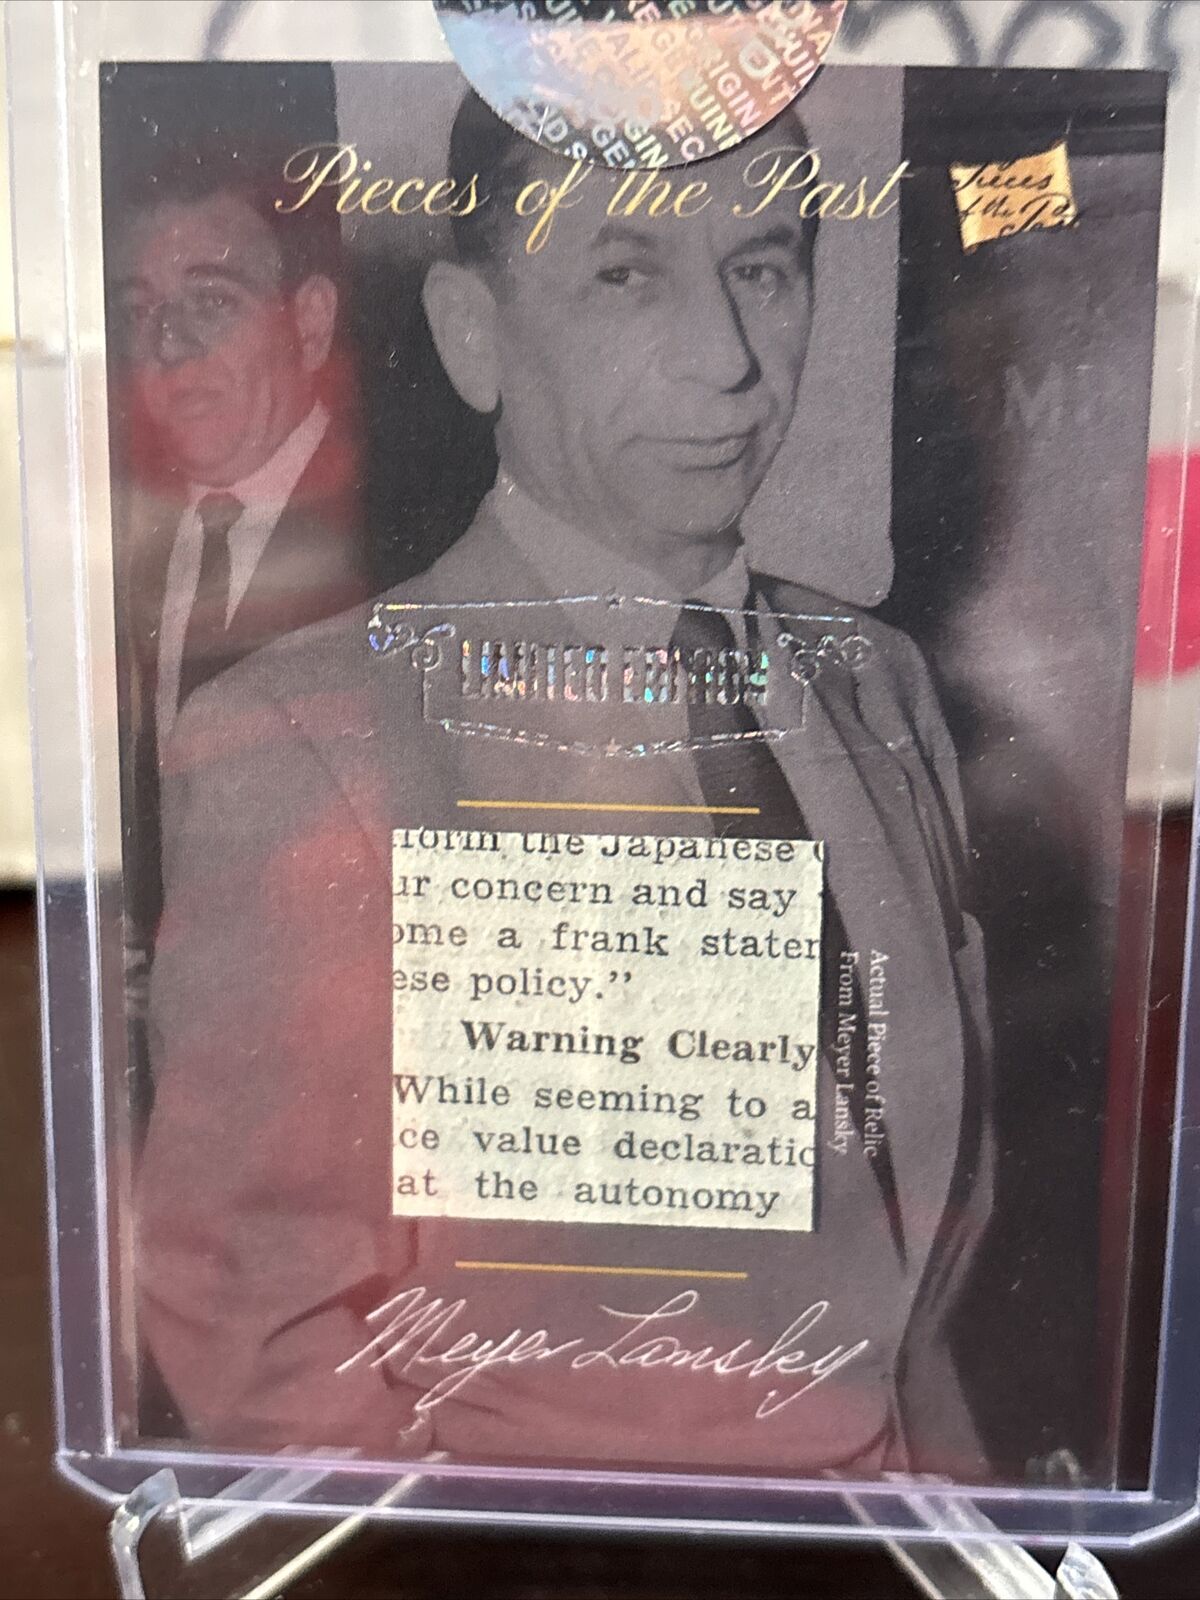 2020 The Bar Pieces of Past Hybrid Edition Silver Limited Edition Meyer Lansky